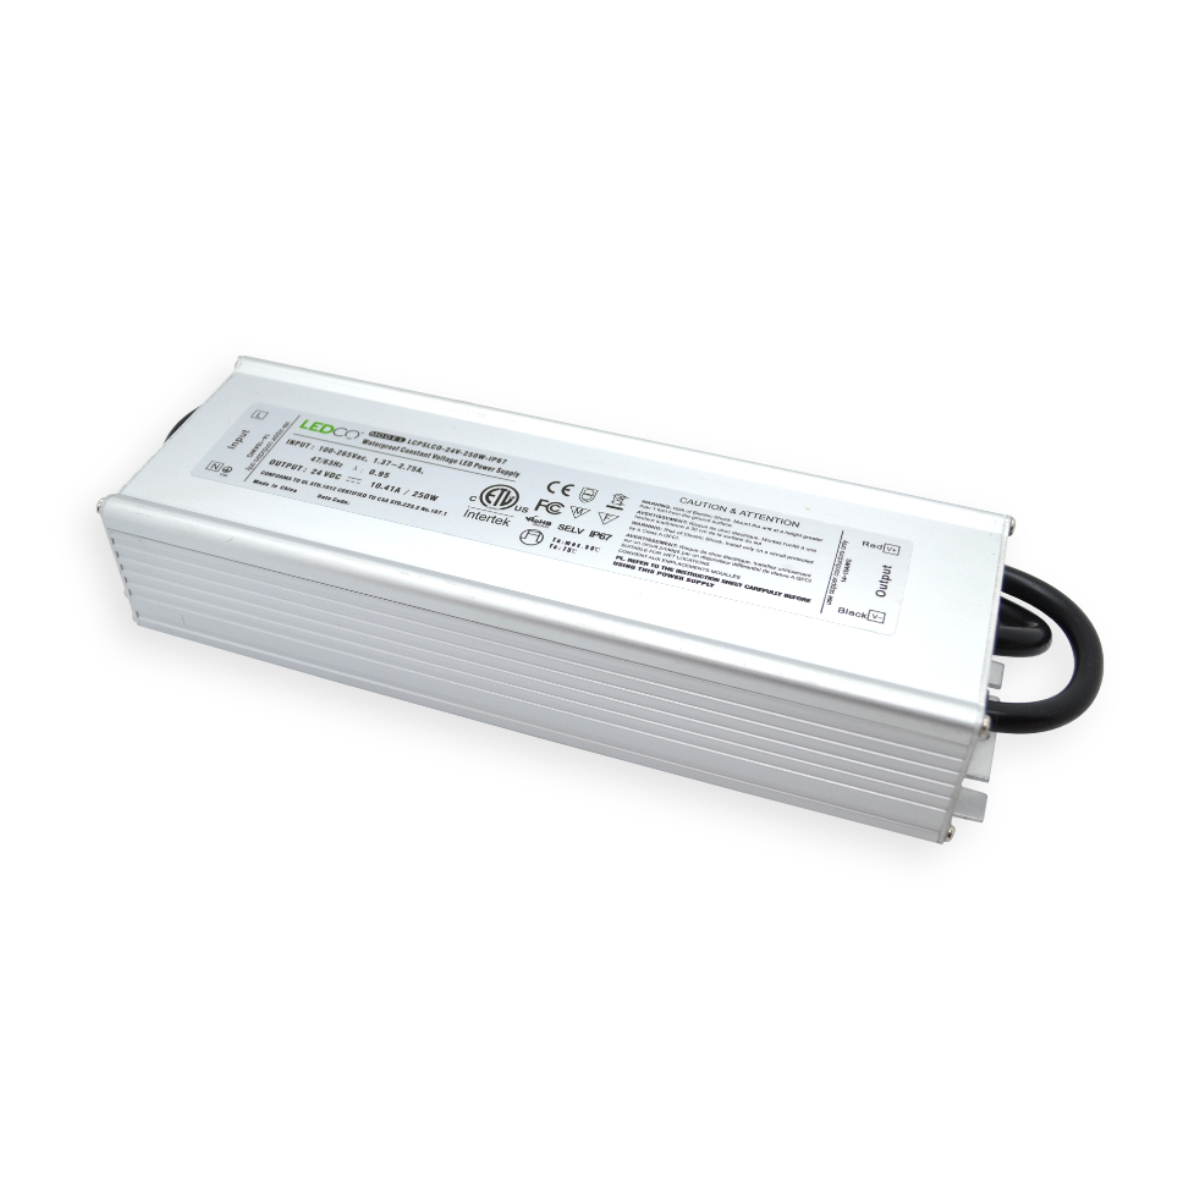 Non-dimmable LED Power Supply